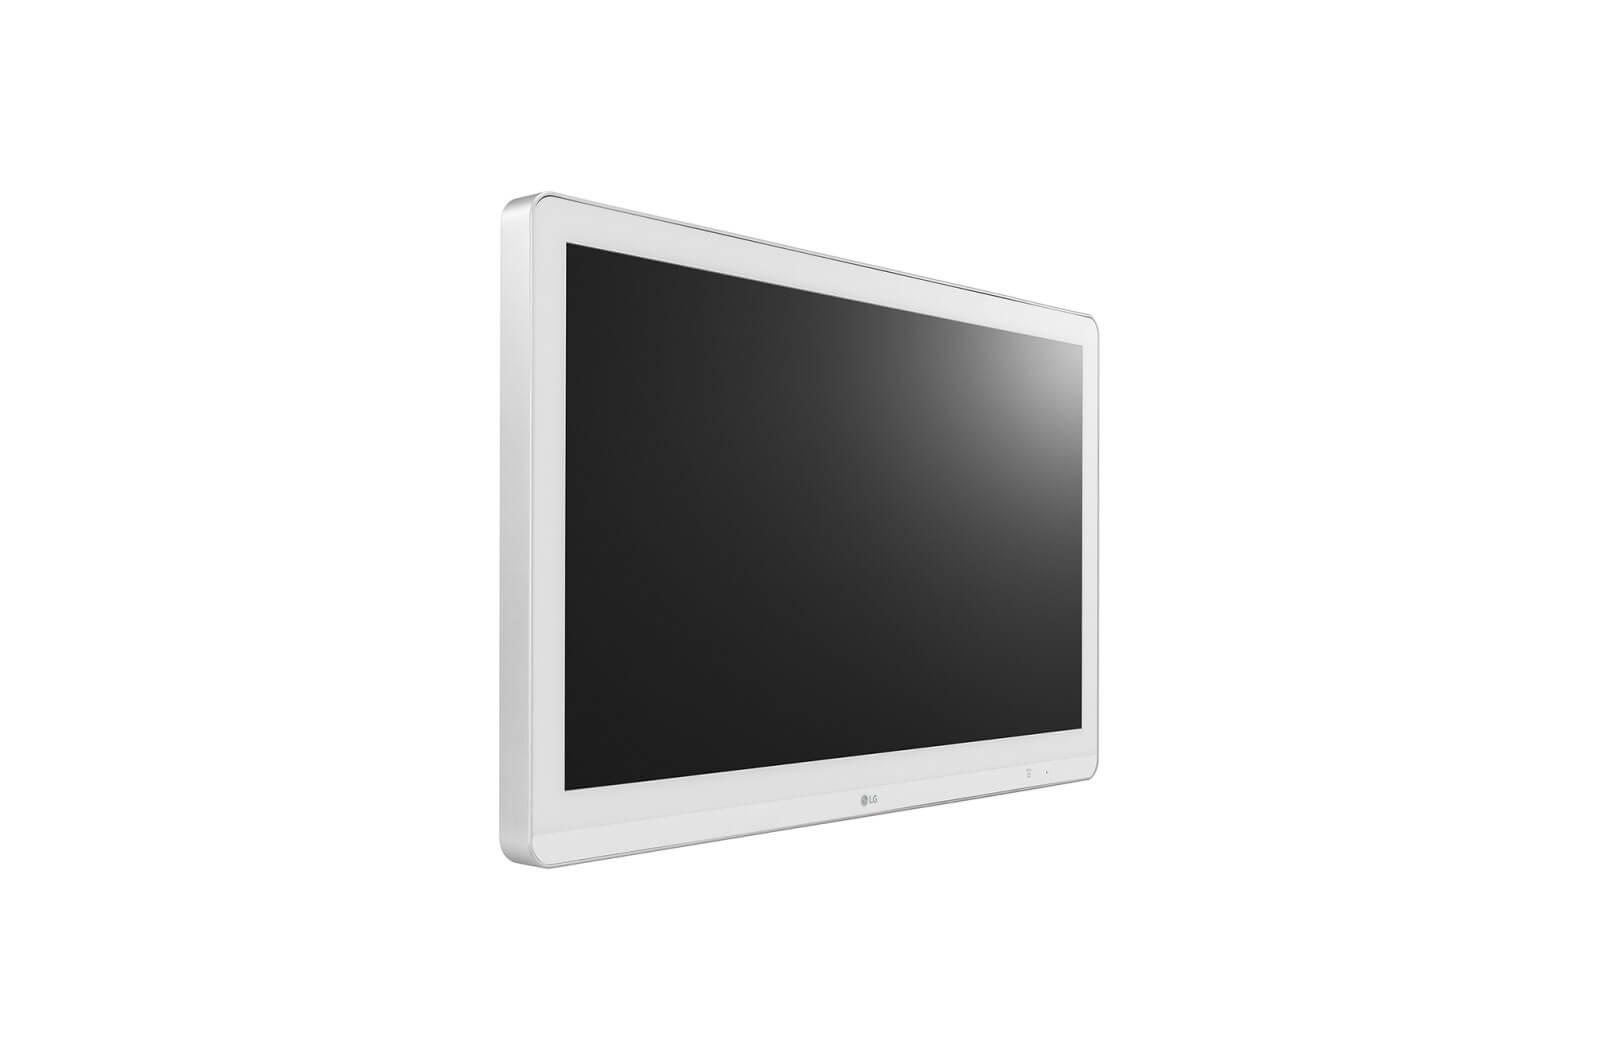 Medical display LG 27HK510S-W Surgical Monitor is optimized for compatibility 